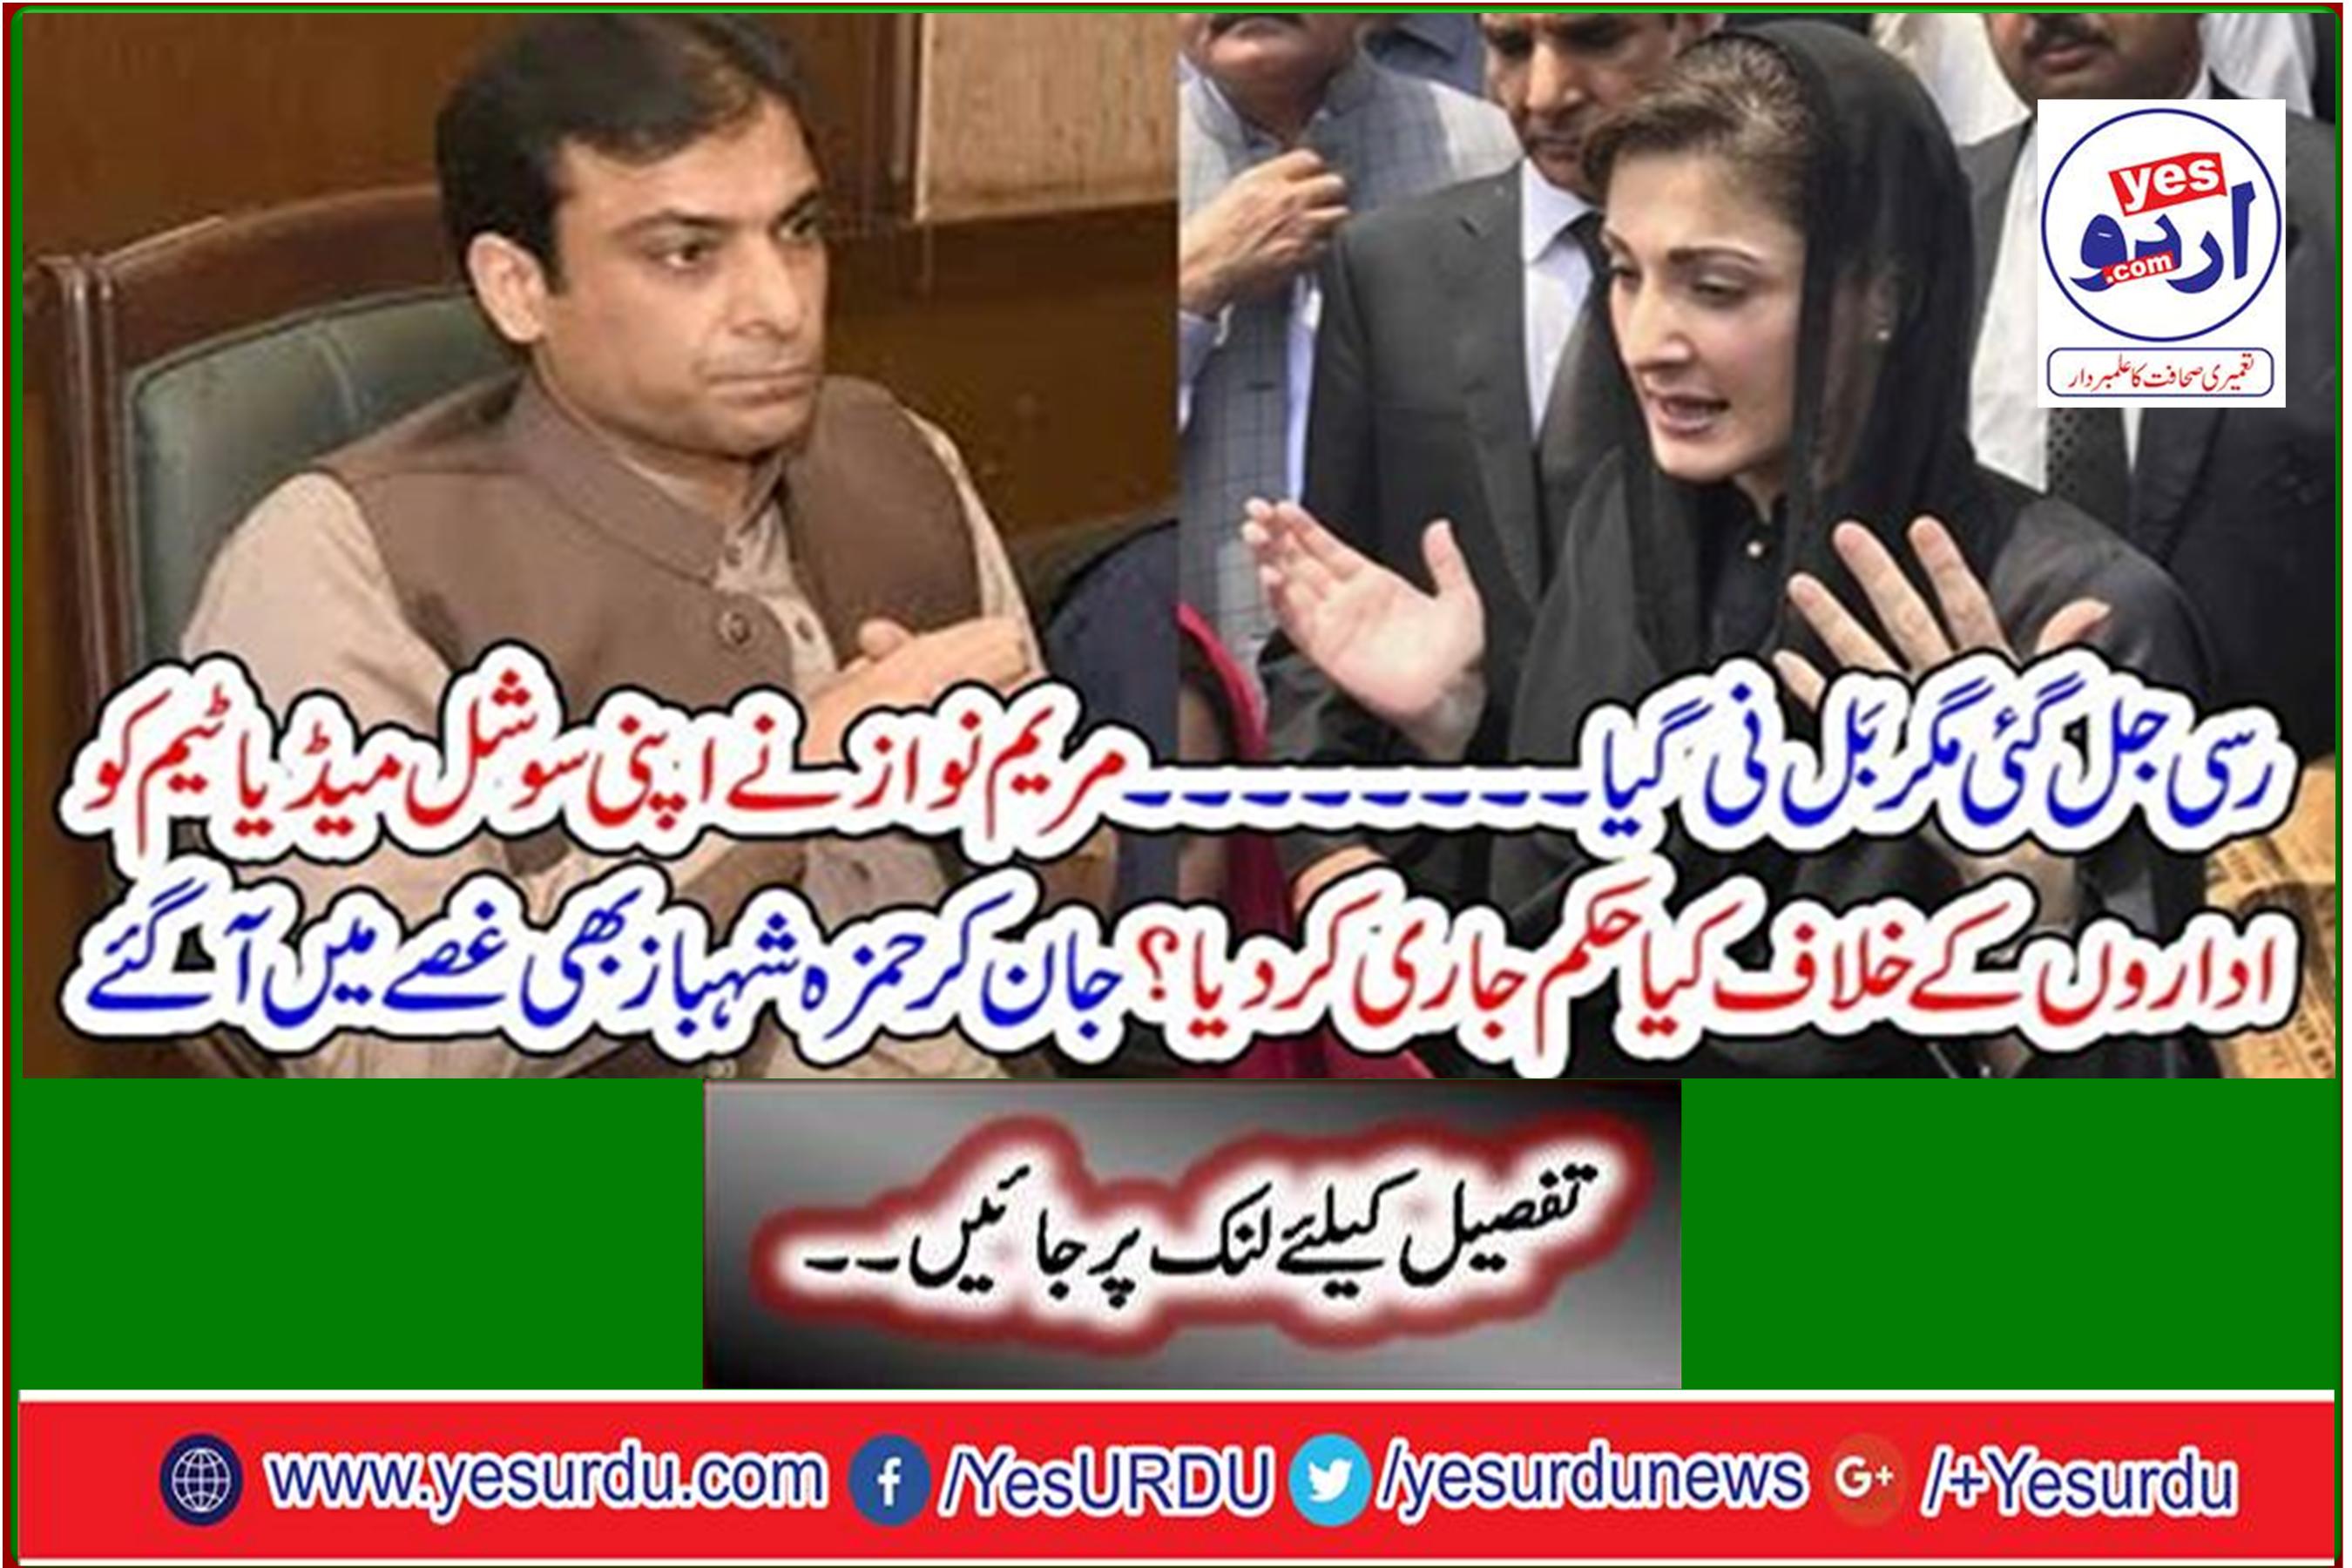 What order has Mary Nawaz issued to her social media team against the institutions? Knowing that Hamza Shahbaz also got angry